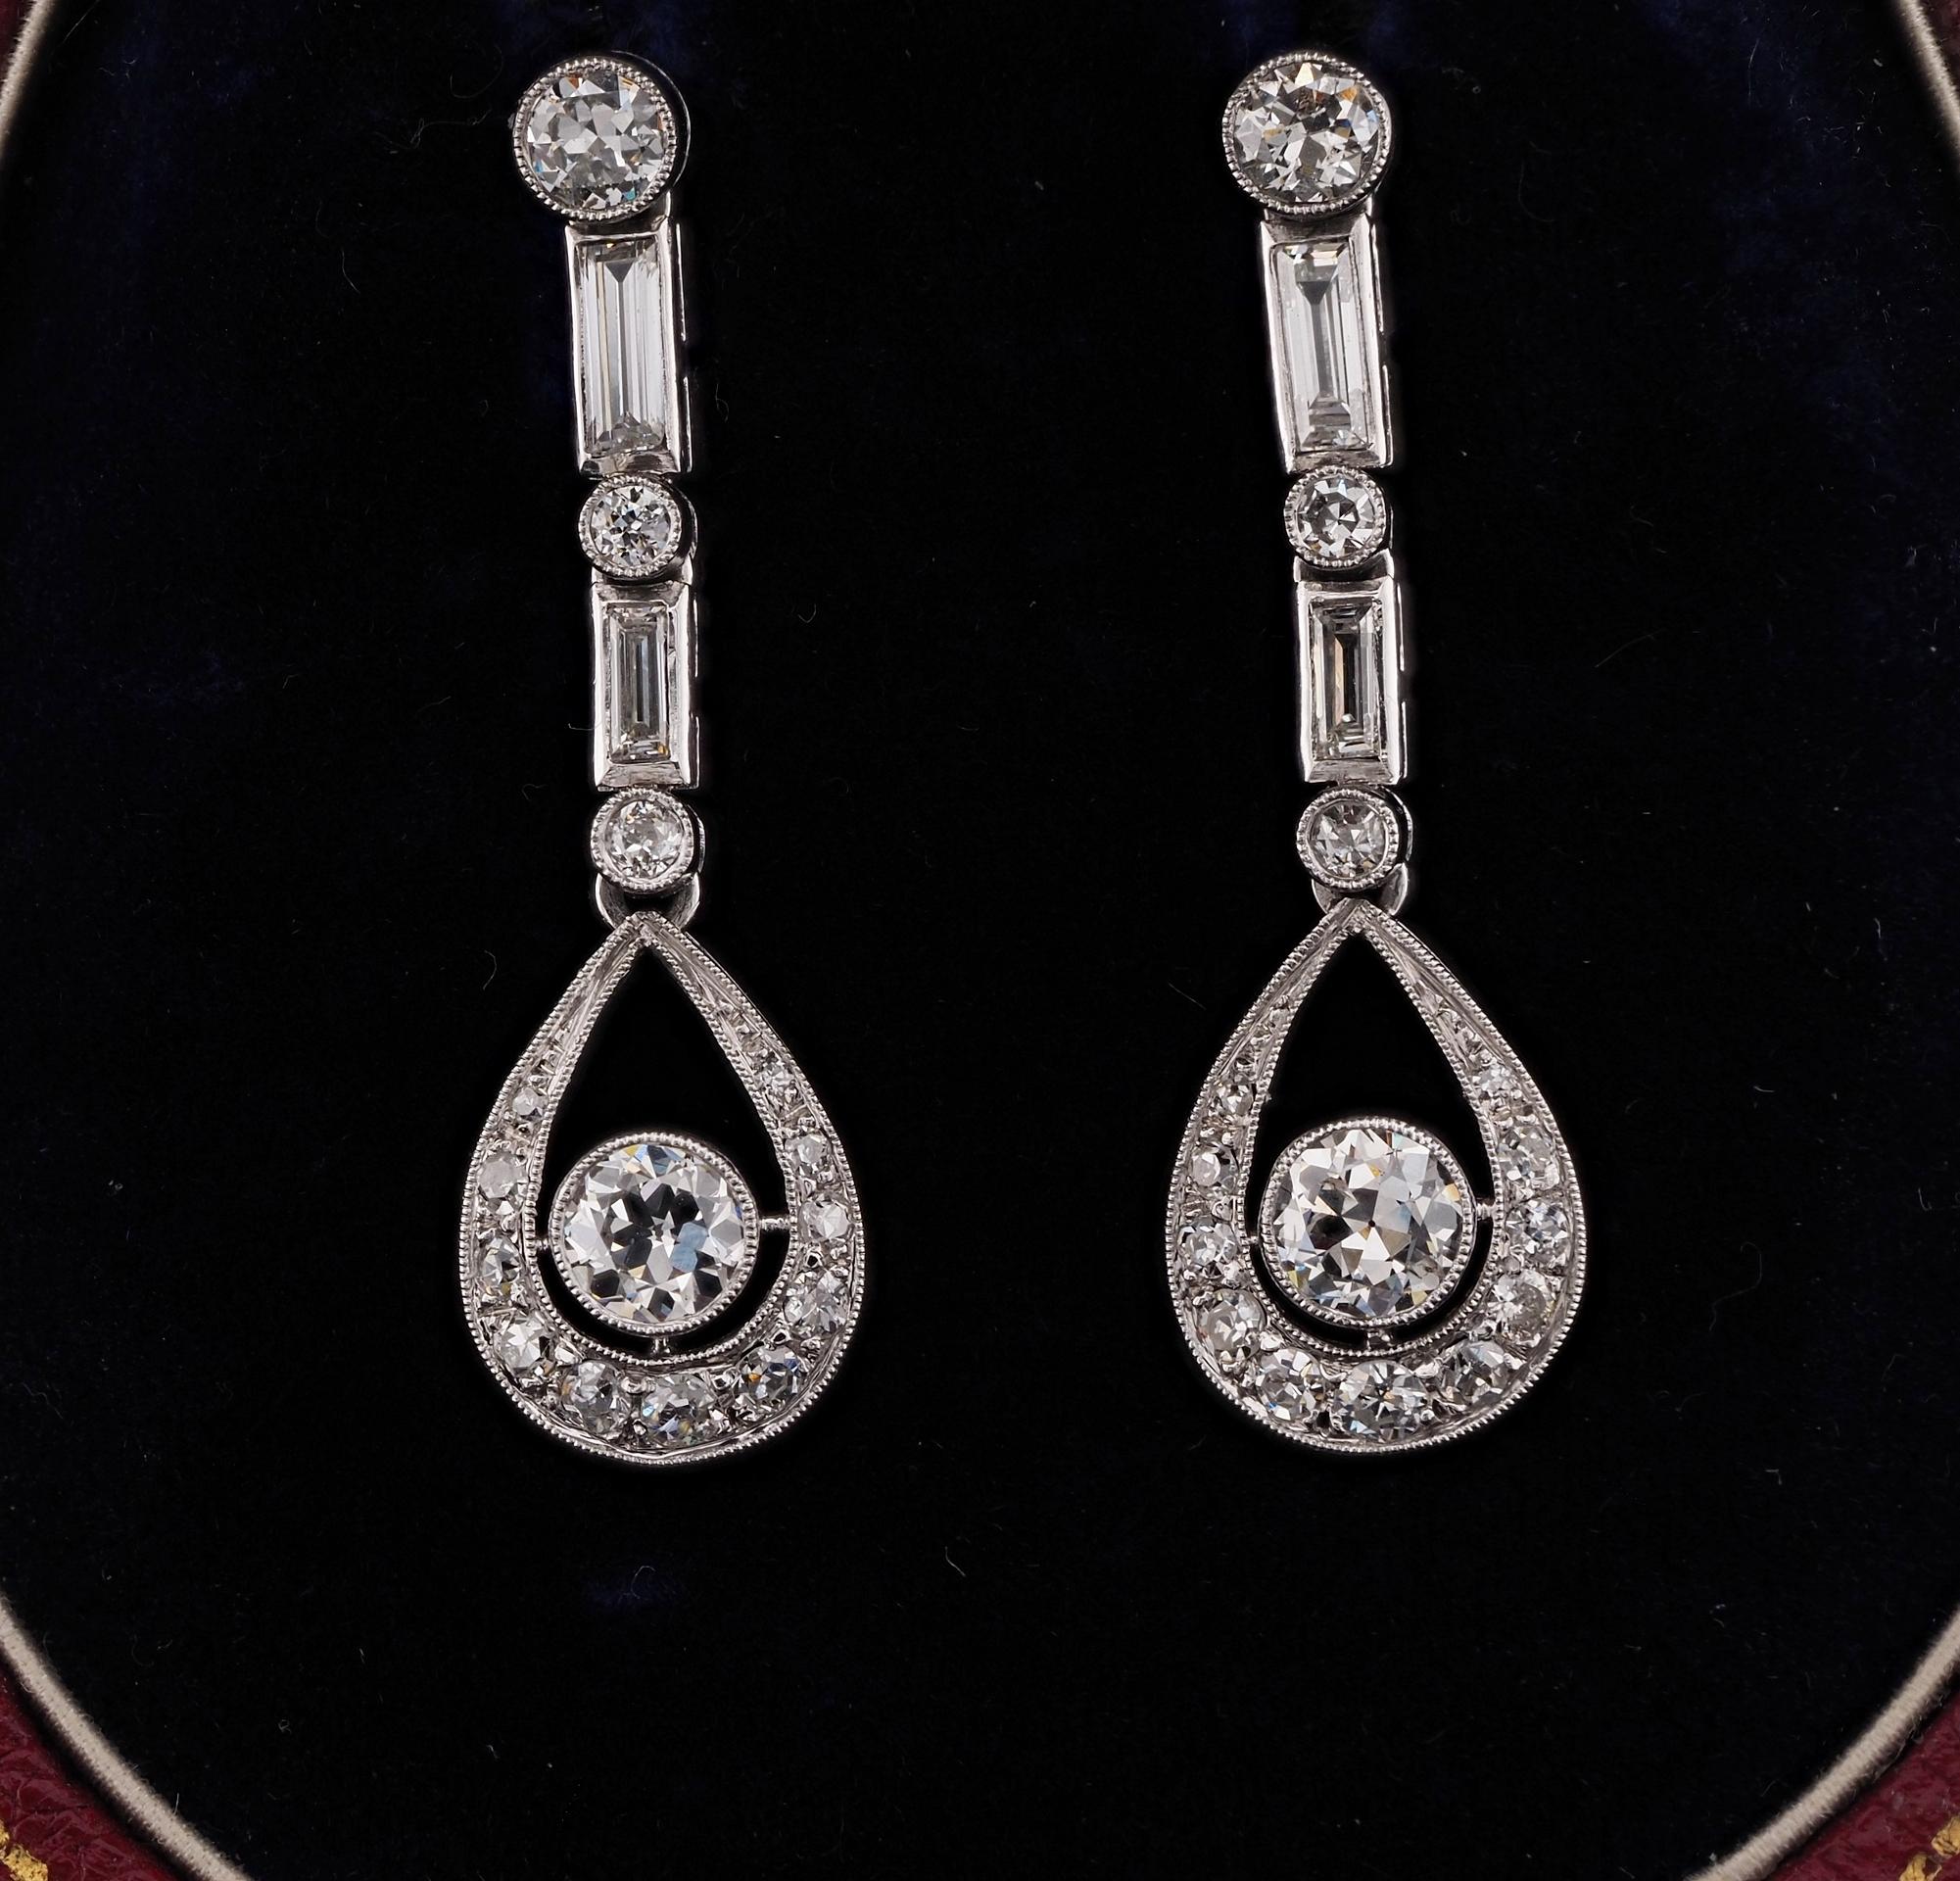 In the Twenties
These perfect length, truly charming, authentic Art Deco Diamond drop earrings, are the epitome of eternal elegance
Utterly beautiful design, superbly hand made as unique during the 20’s of solid Platinum, marked
Loaded throughout